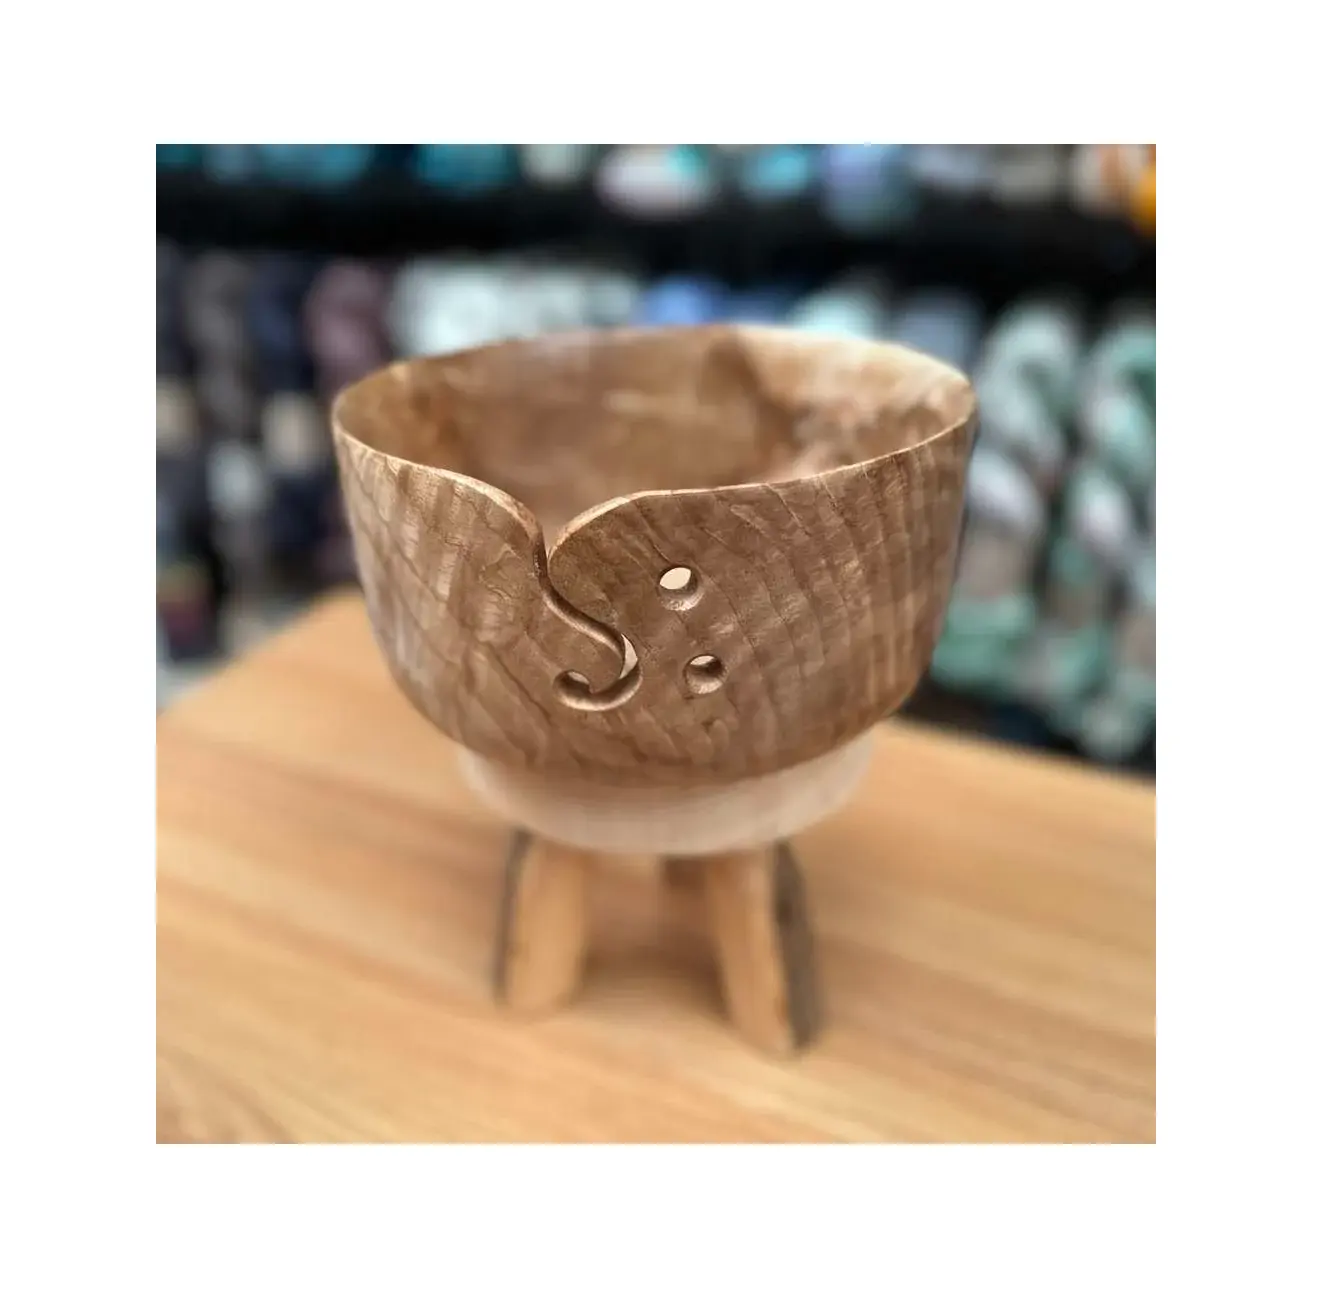 Handmade Large Yarn Bowls for Crocheting Round Knitting Wool Storage Bowl Holder Wooden stand with old woman daily use